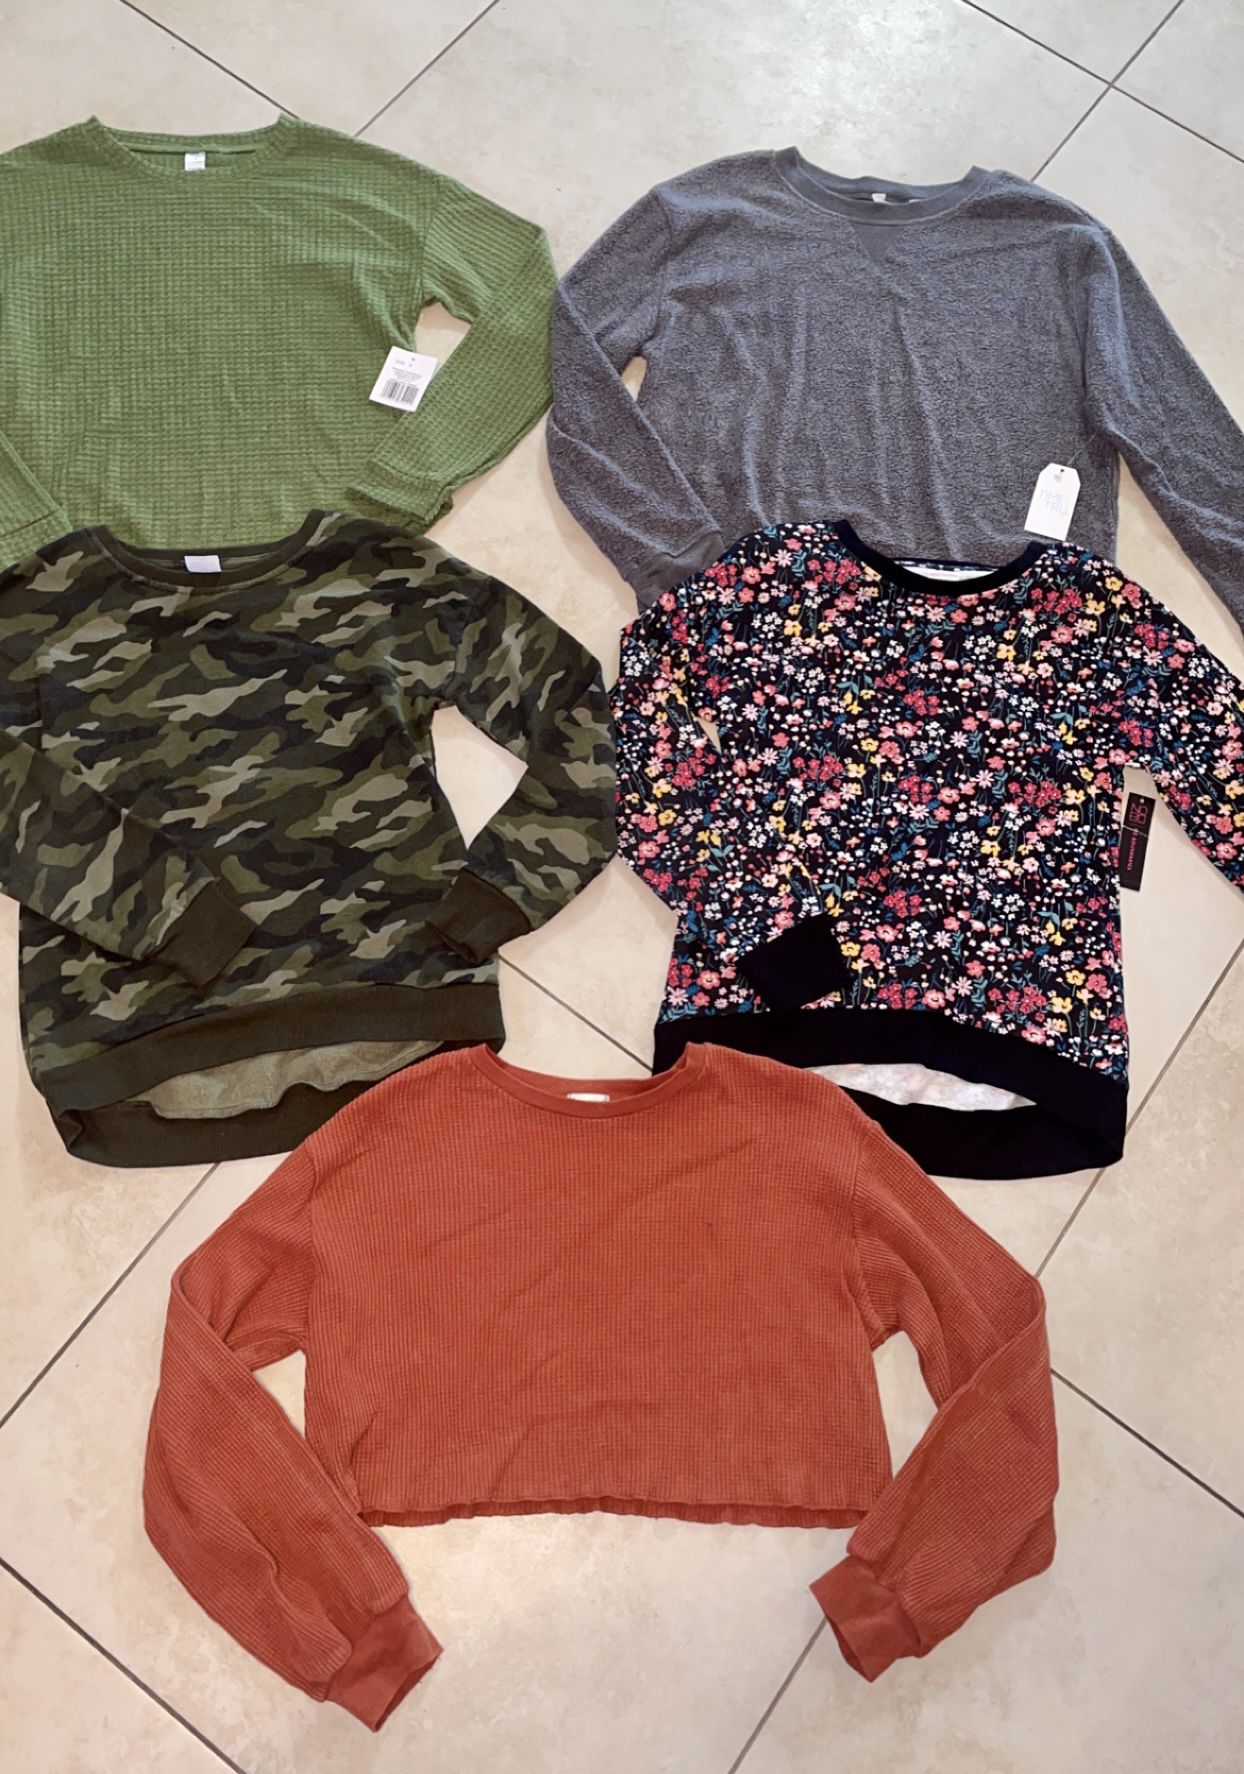 Womens Sz Small Long sleeve/Sweatshirts $10 For All! 3 Are NWT 